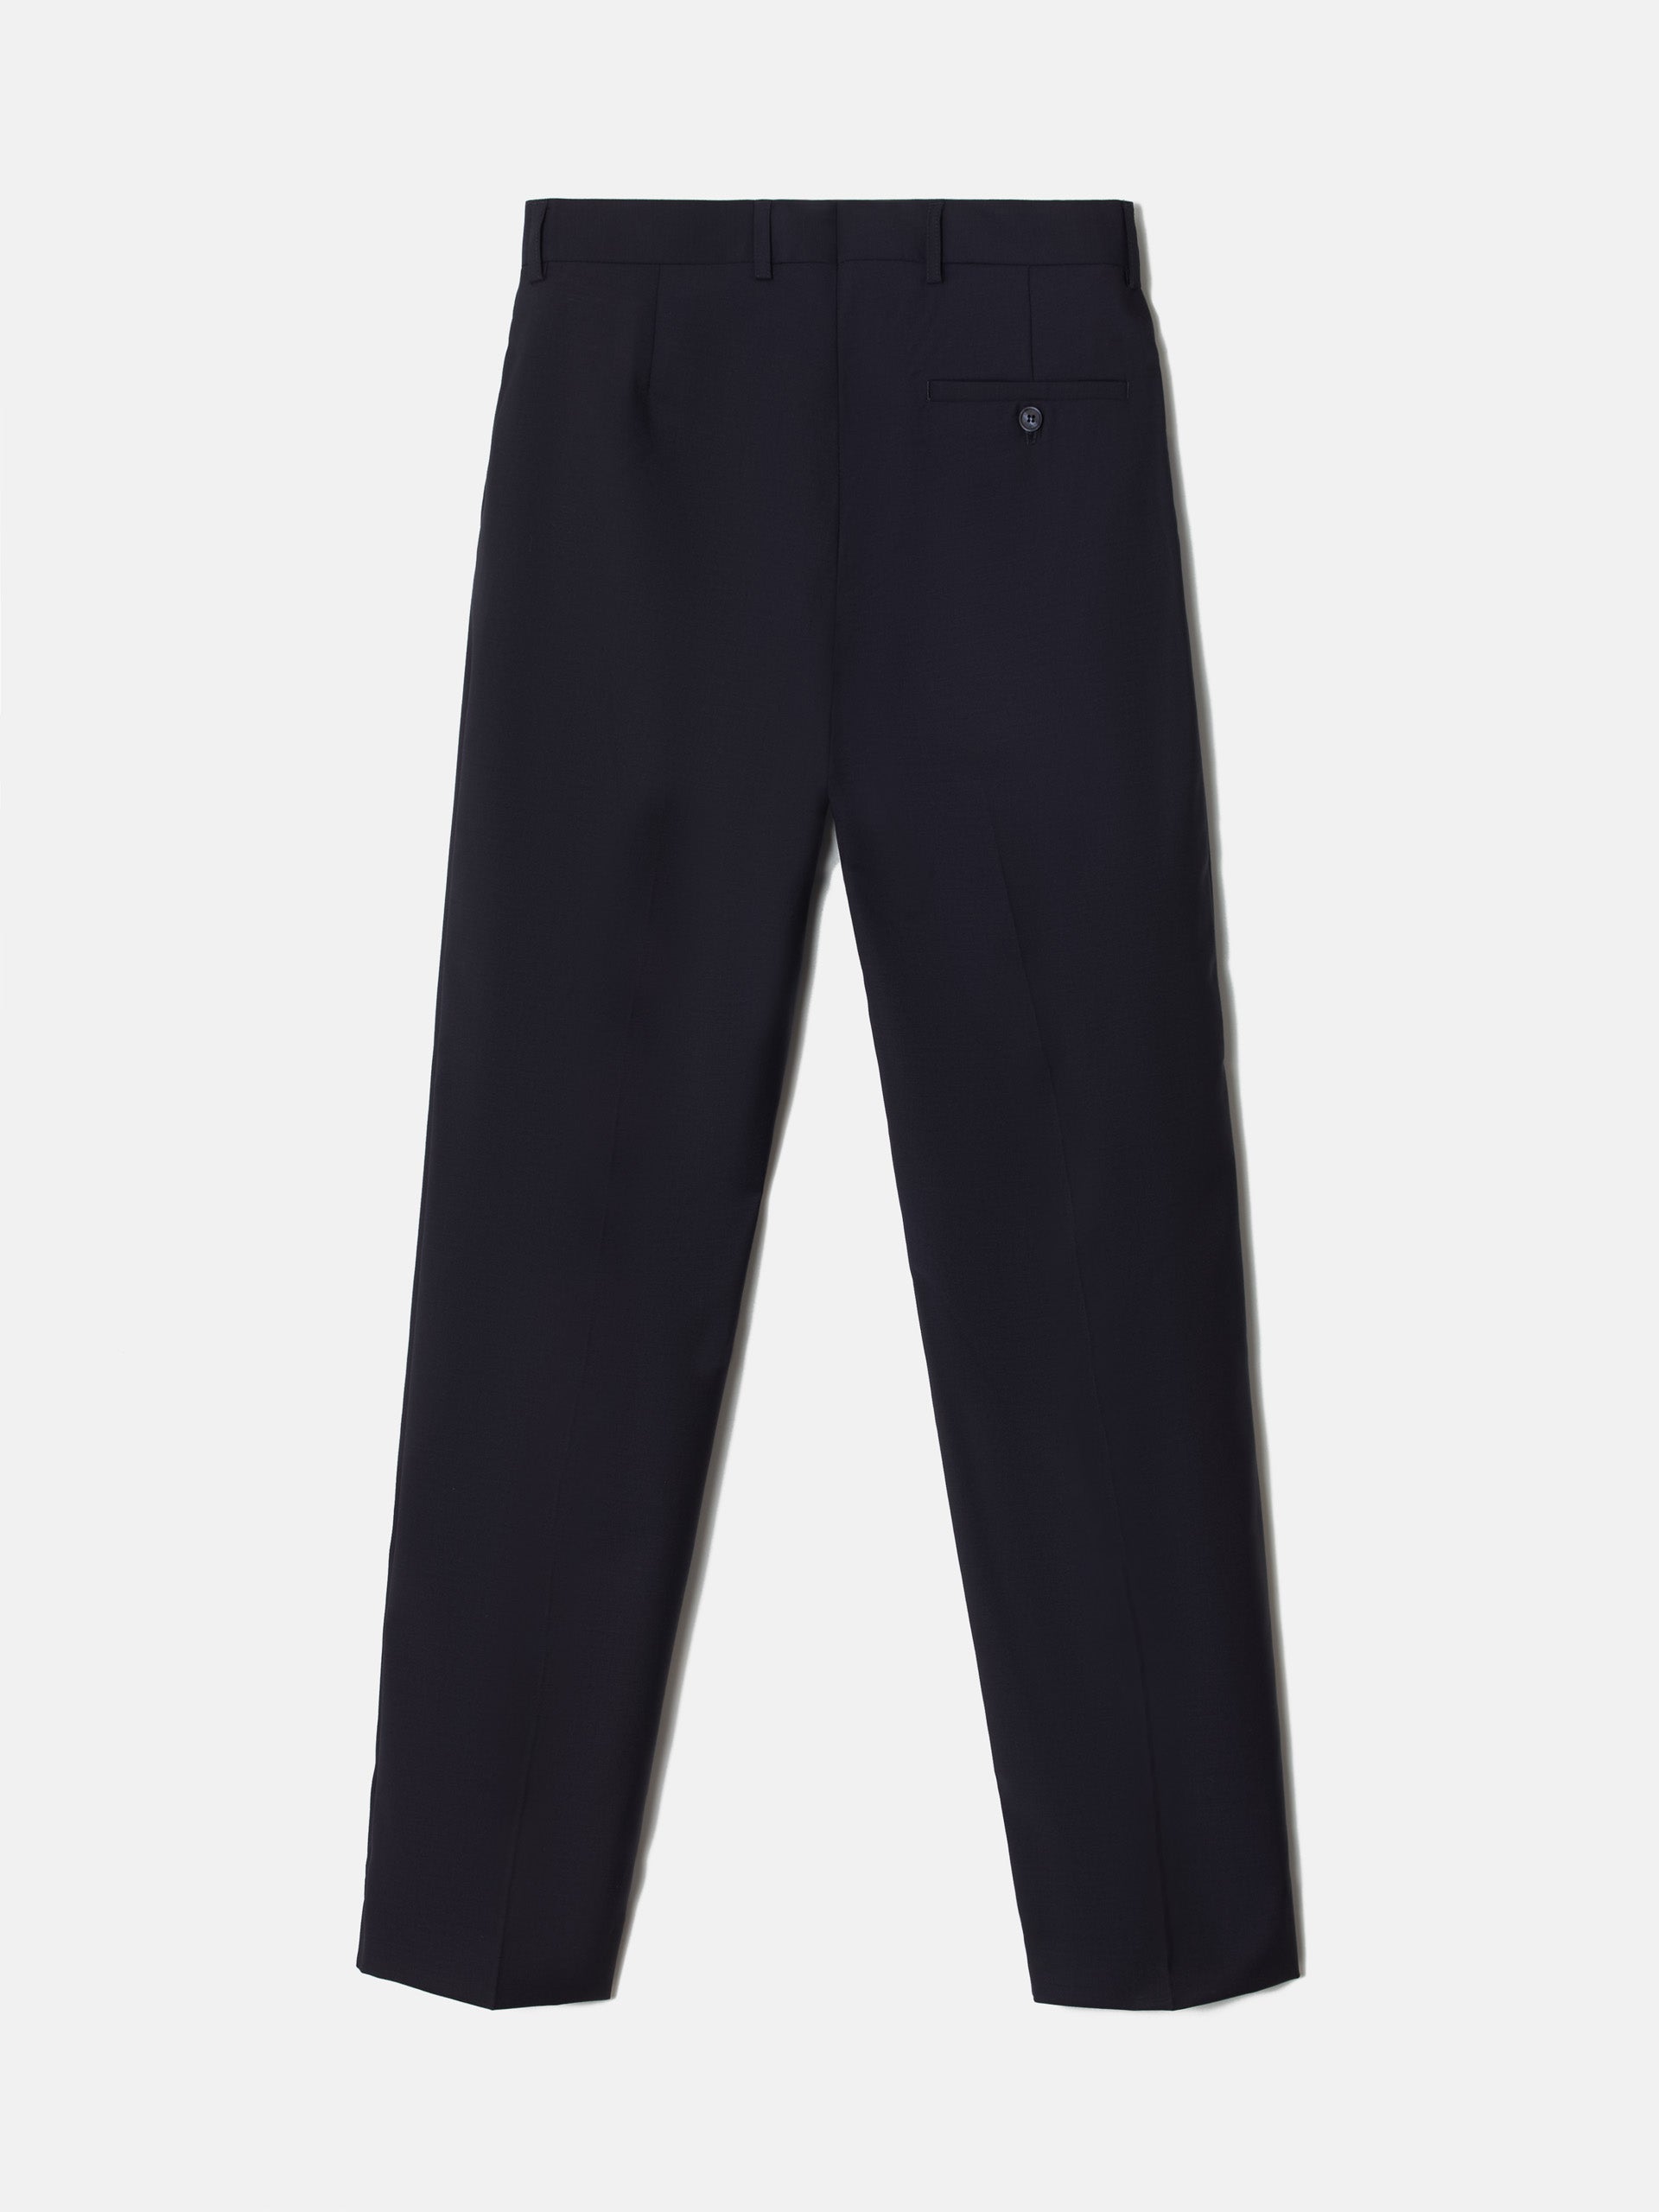 Navy blue stretch double-breasted suit pants